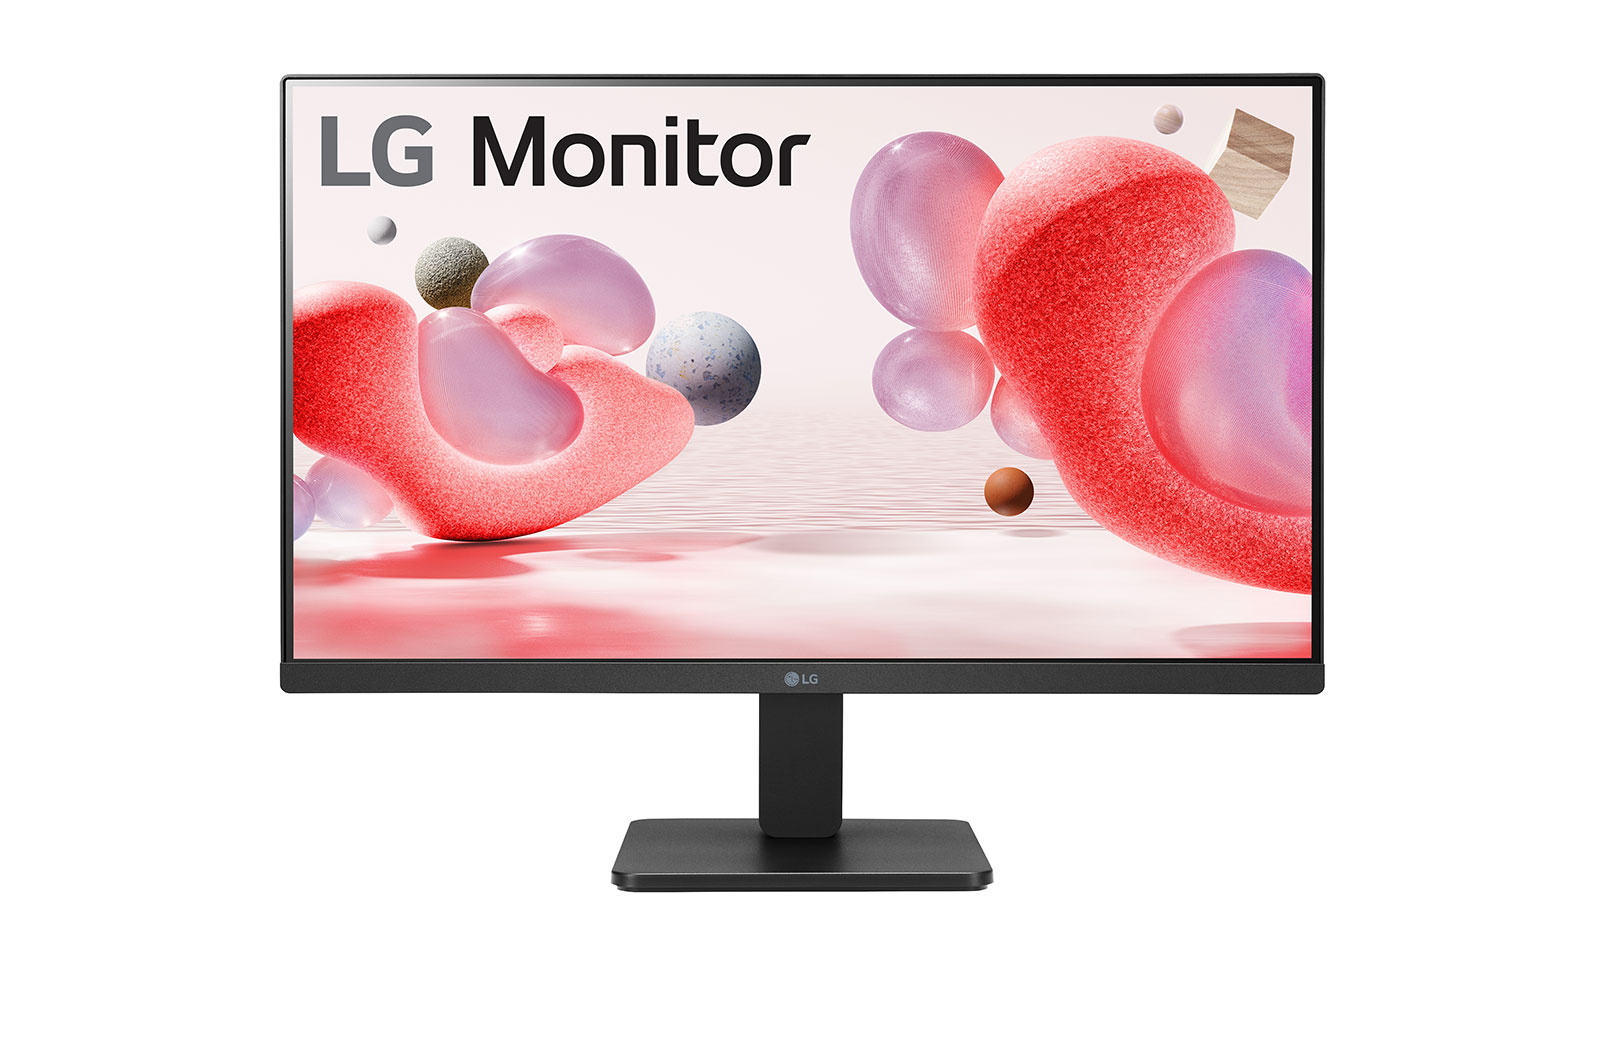 24MR400-B Lg Monitor 24Mr400 B Led 24 Panel Ips Resolucion 1920 X 1080 Fhd Frecuencia 100Hz Color Negro Conexion Vga Hdmi  Amd Freesync Dynamic Action Sync Smart Energy Saving Auto Input Switch Flicker Safe Super Resolution Black Stabilizer Onscreen Control  Osc  Color Weakness Mode Reader Mode